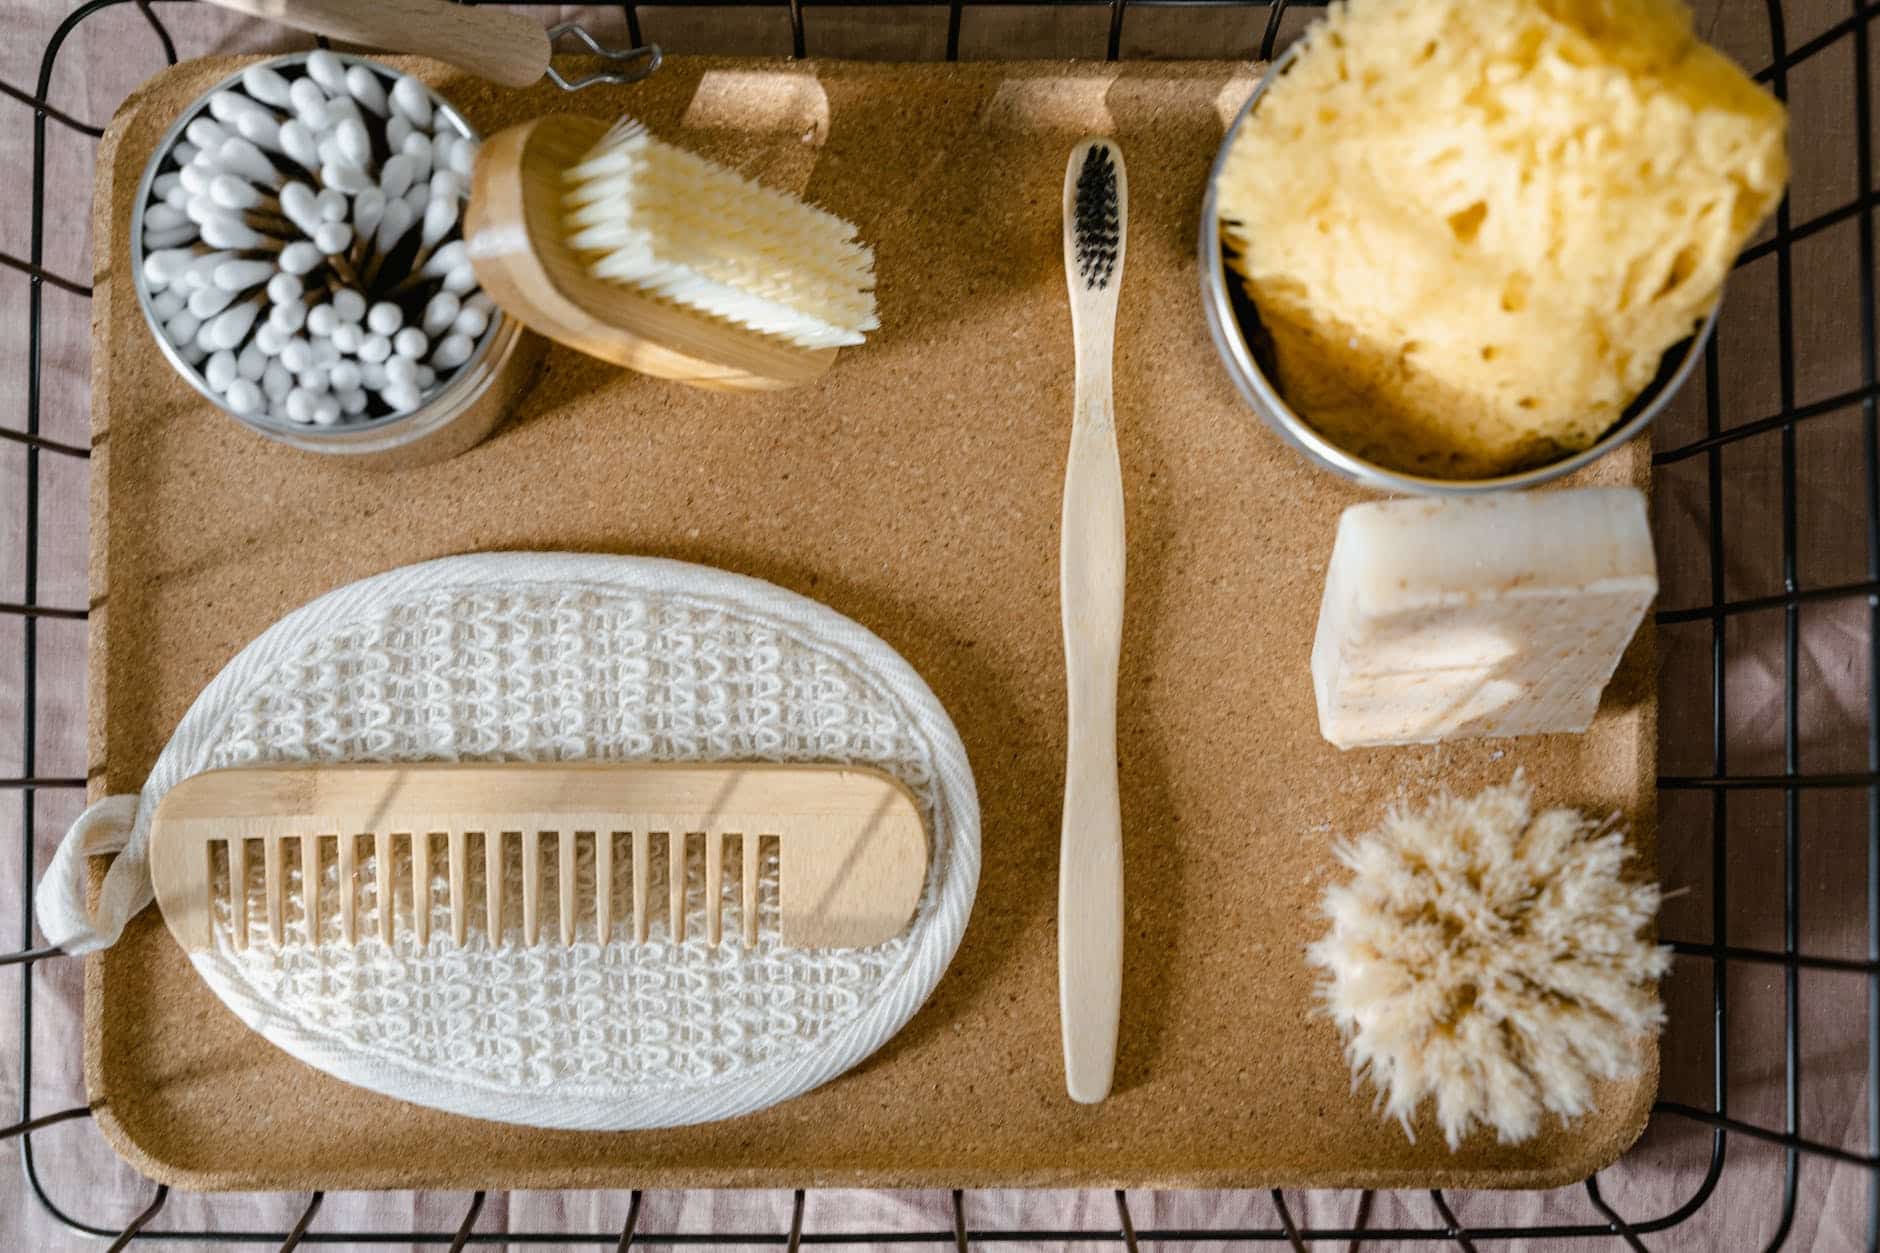 bathing essentials and toiletries on a wooden tray